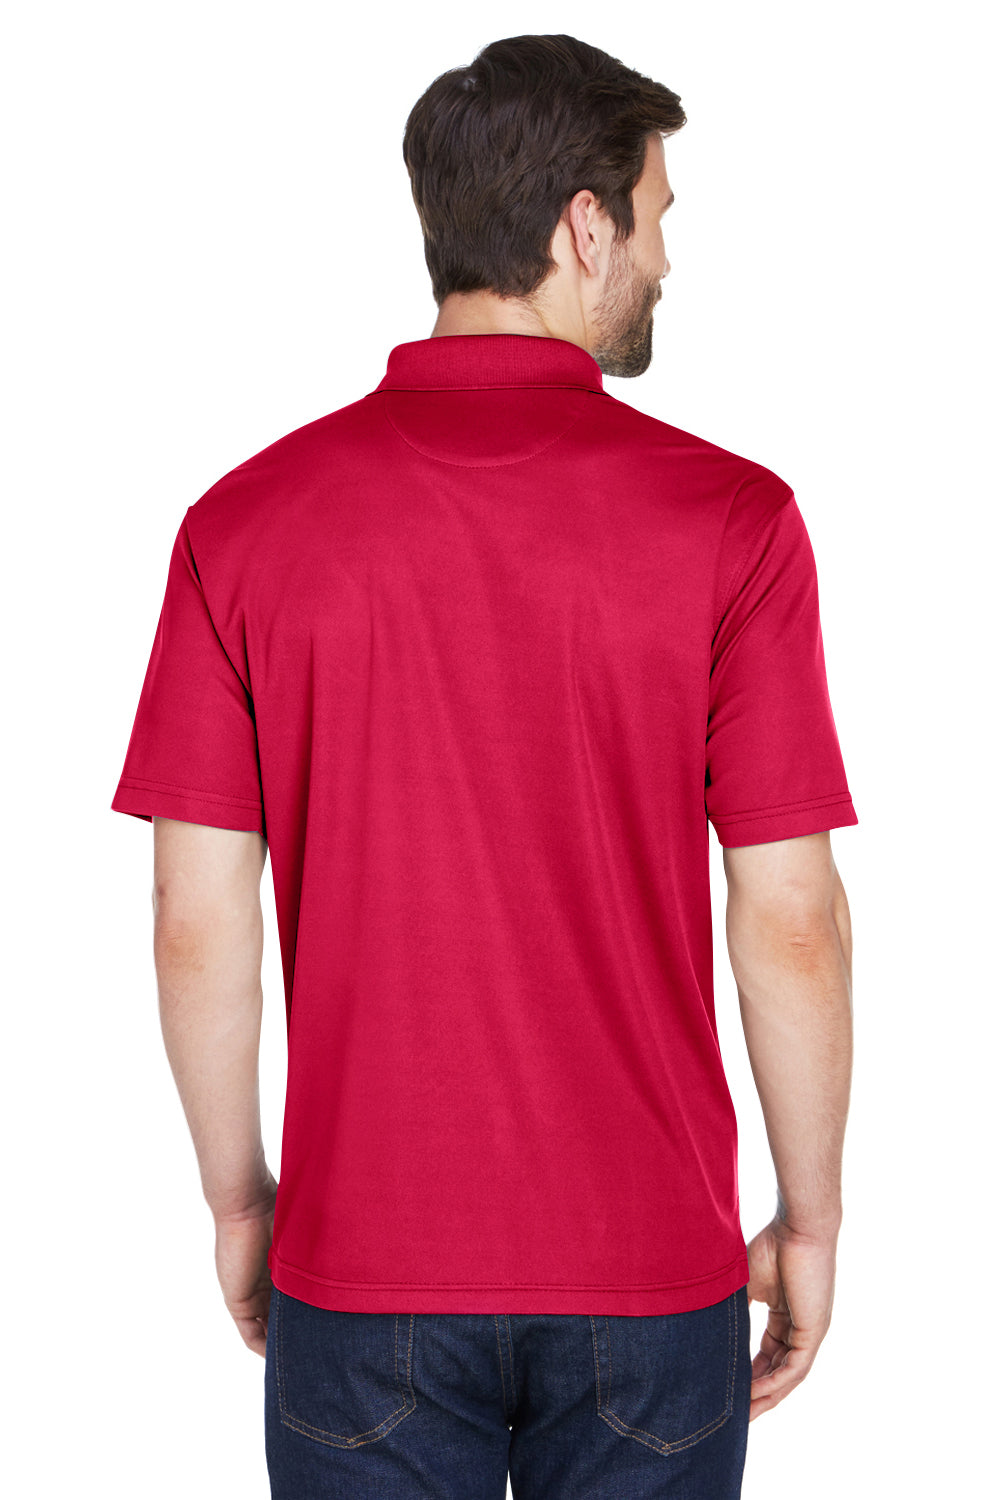 UltraClub 8210 Mens Cool & Dry Moisture Wicking Short Sleeve Polo Shirt Cardinal Red Back